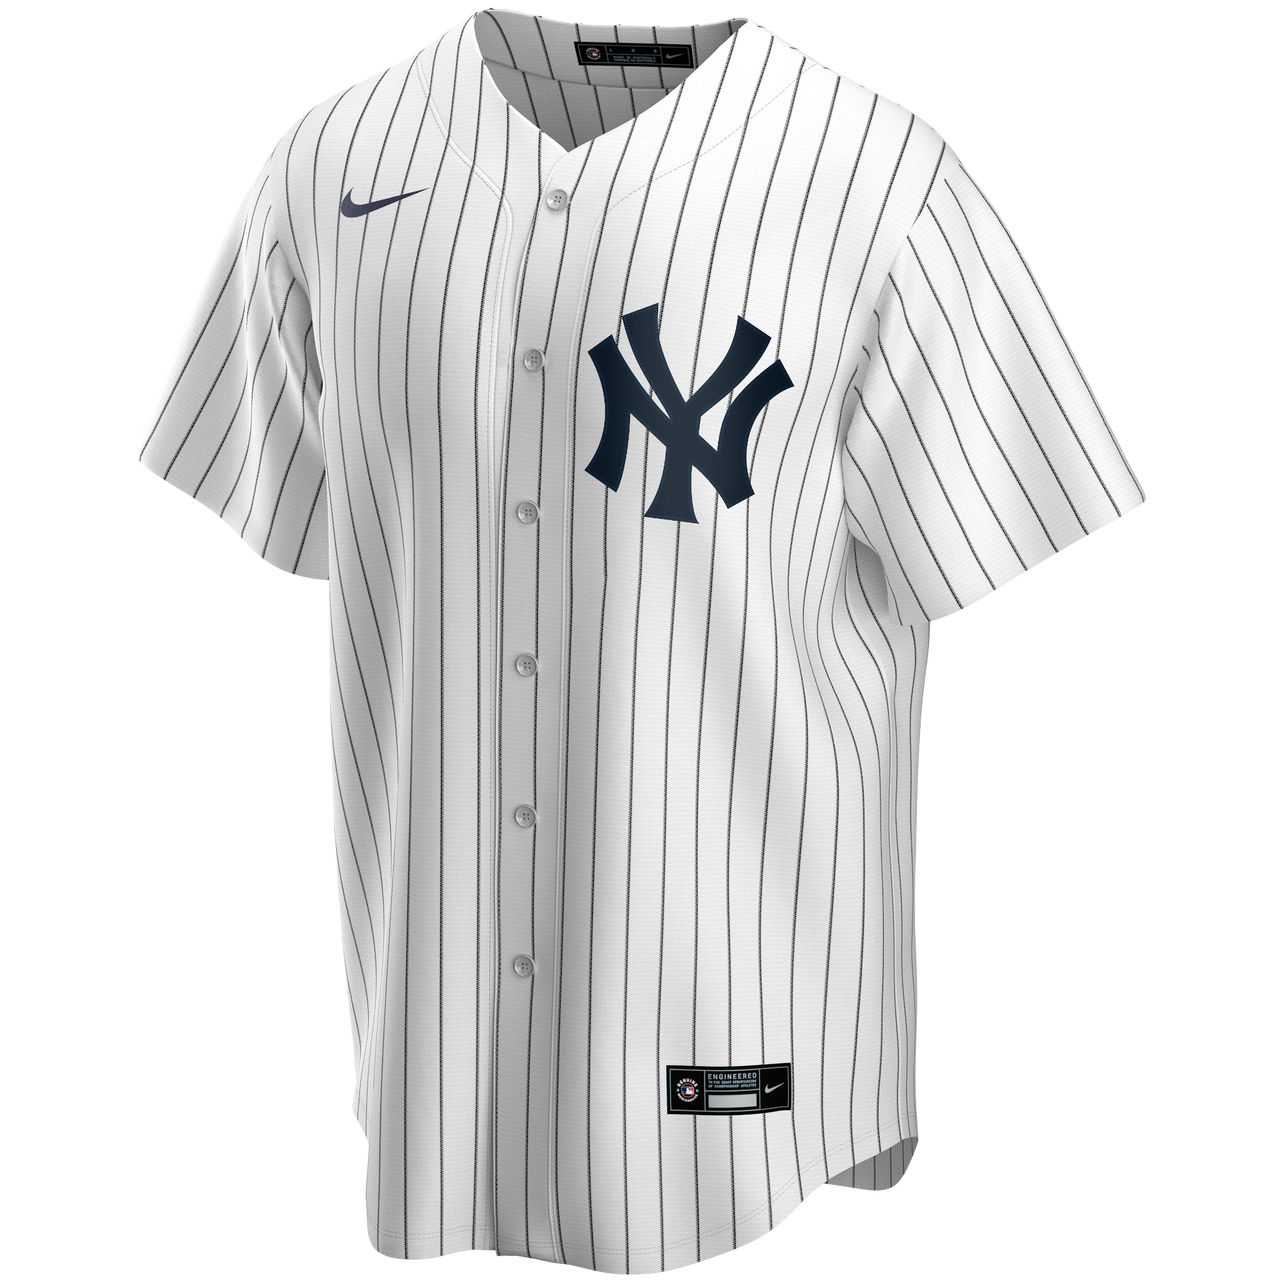 rizzo jersey yankees number